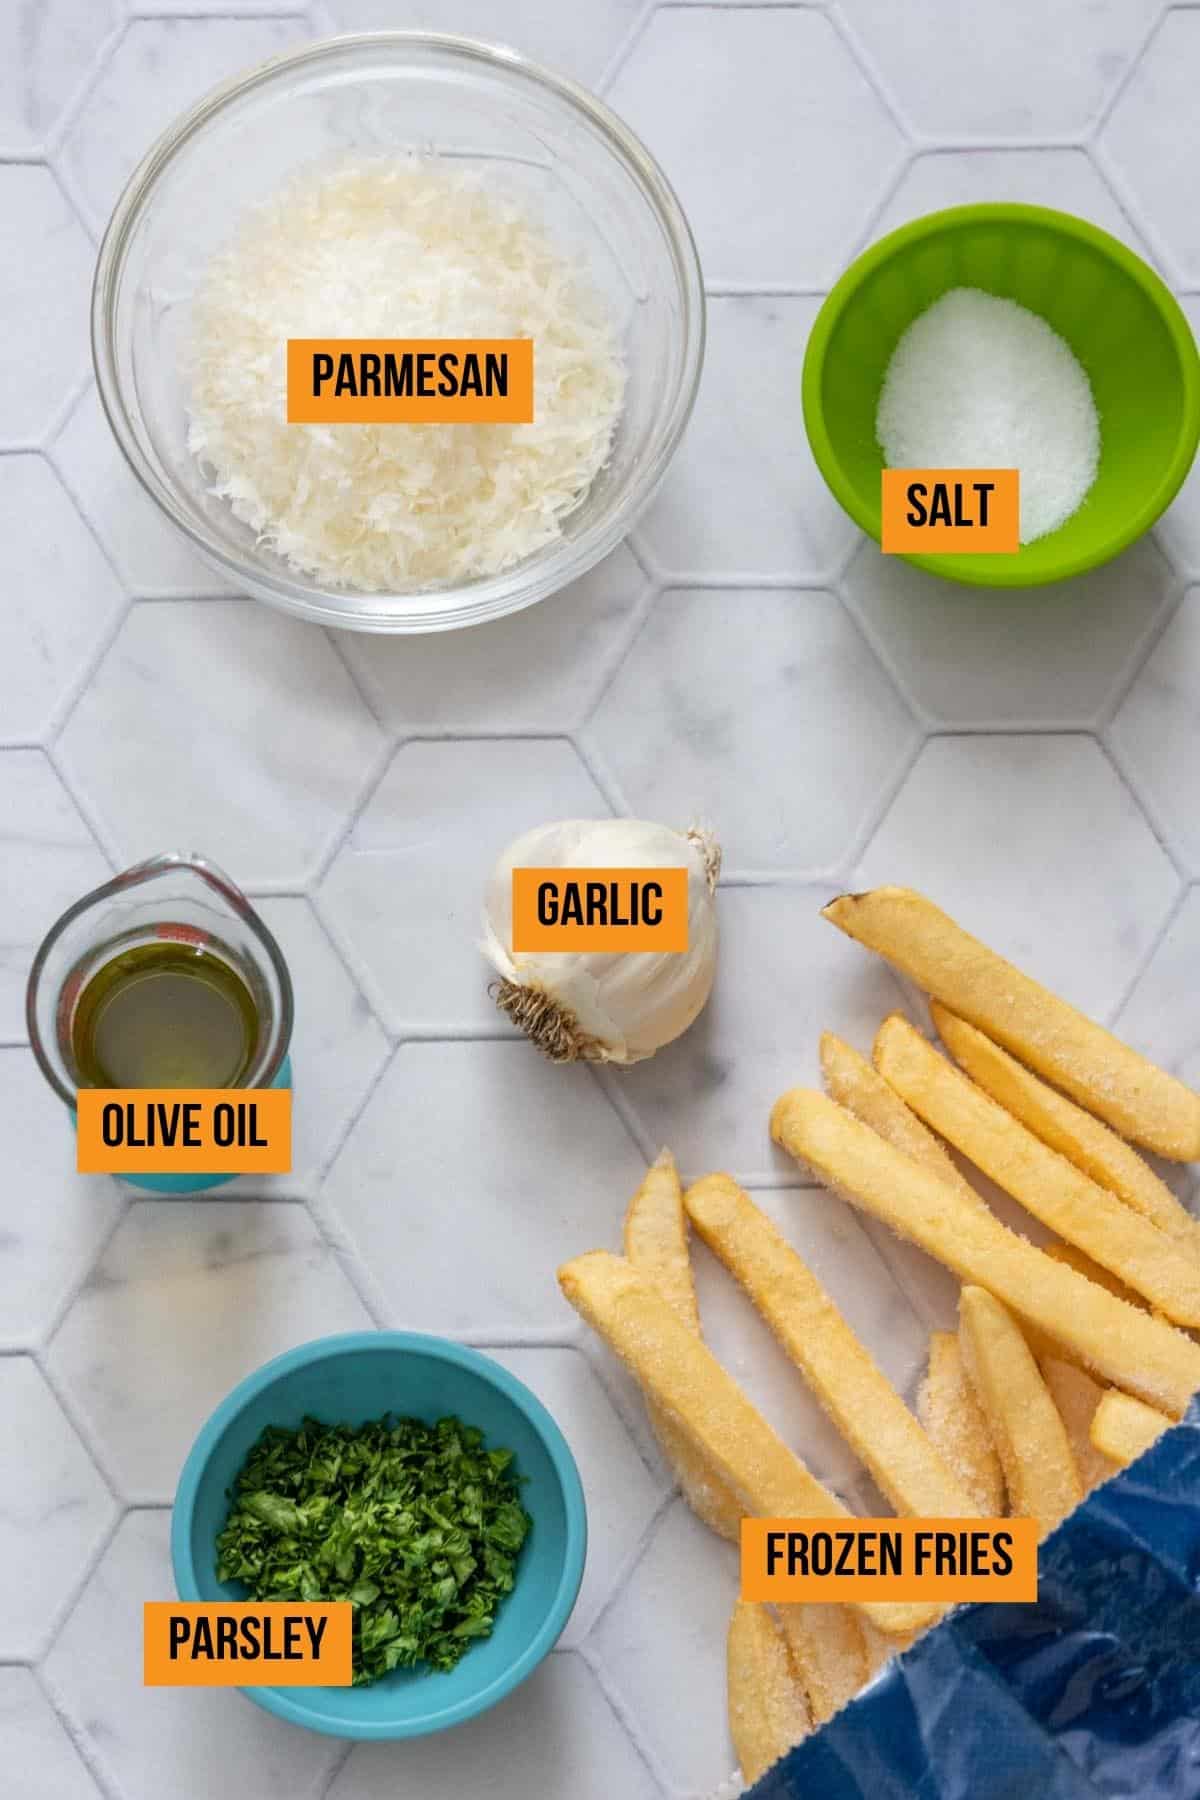 Ingredients for garlic fries on a tile surface with labels.